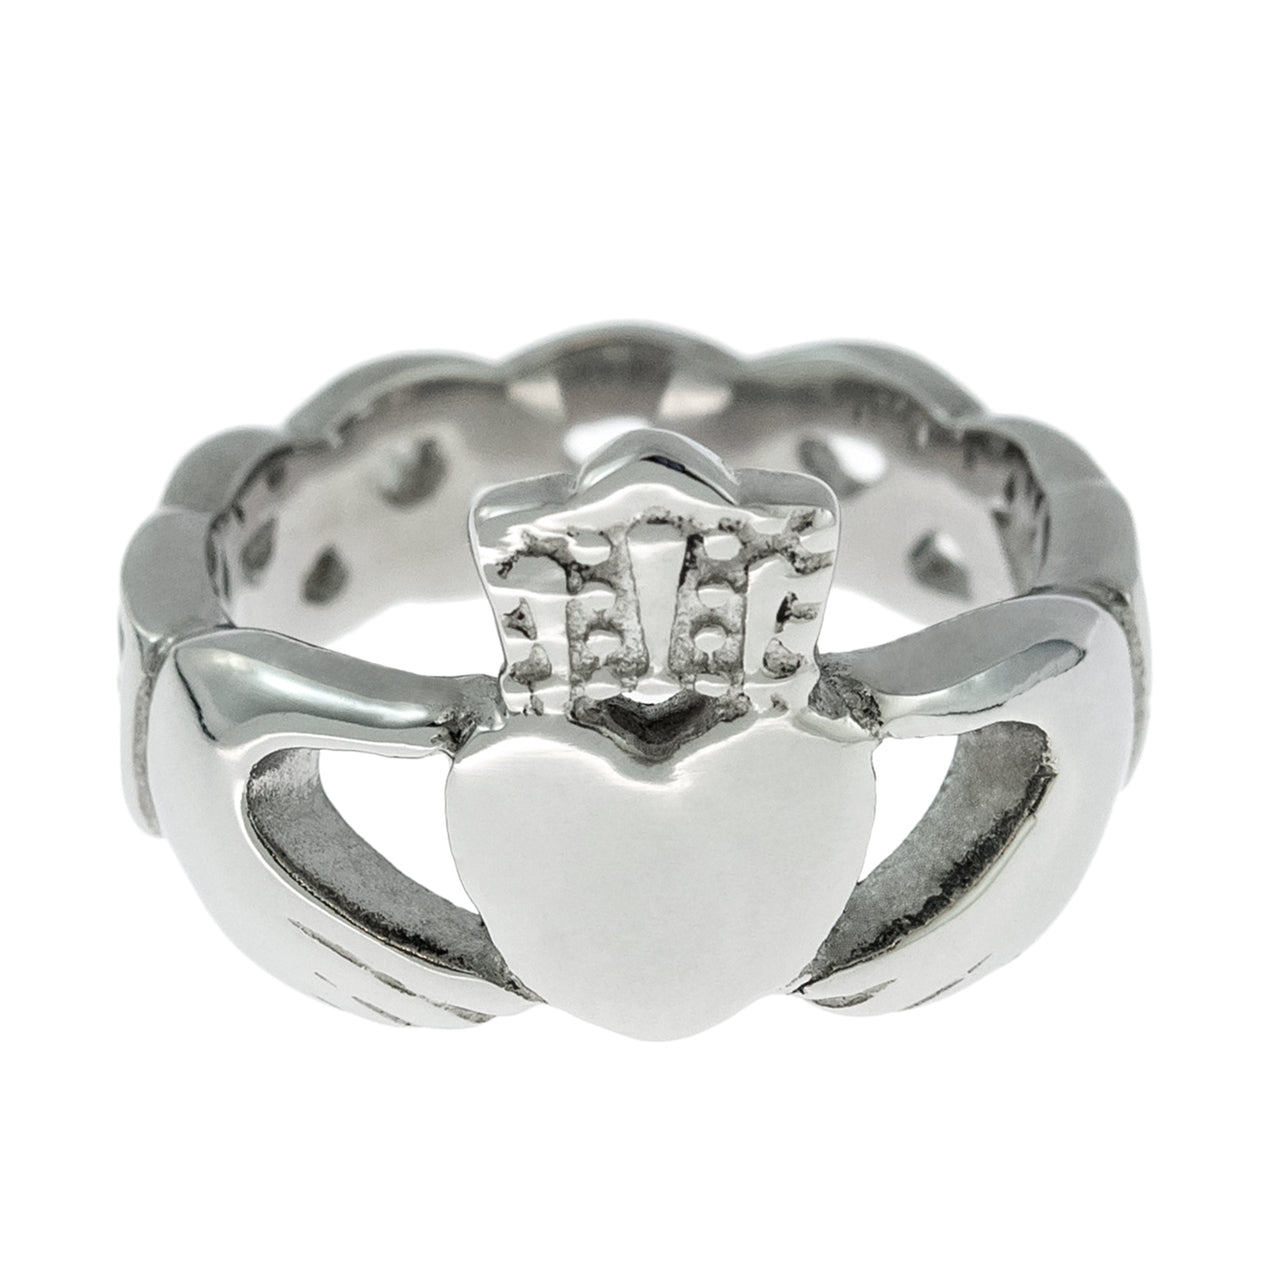 Large Claddagh Ring